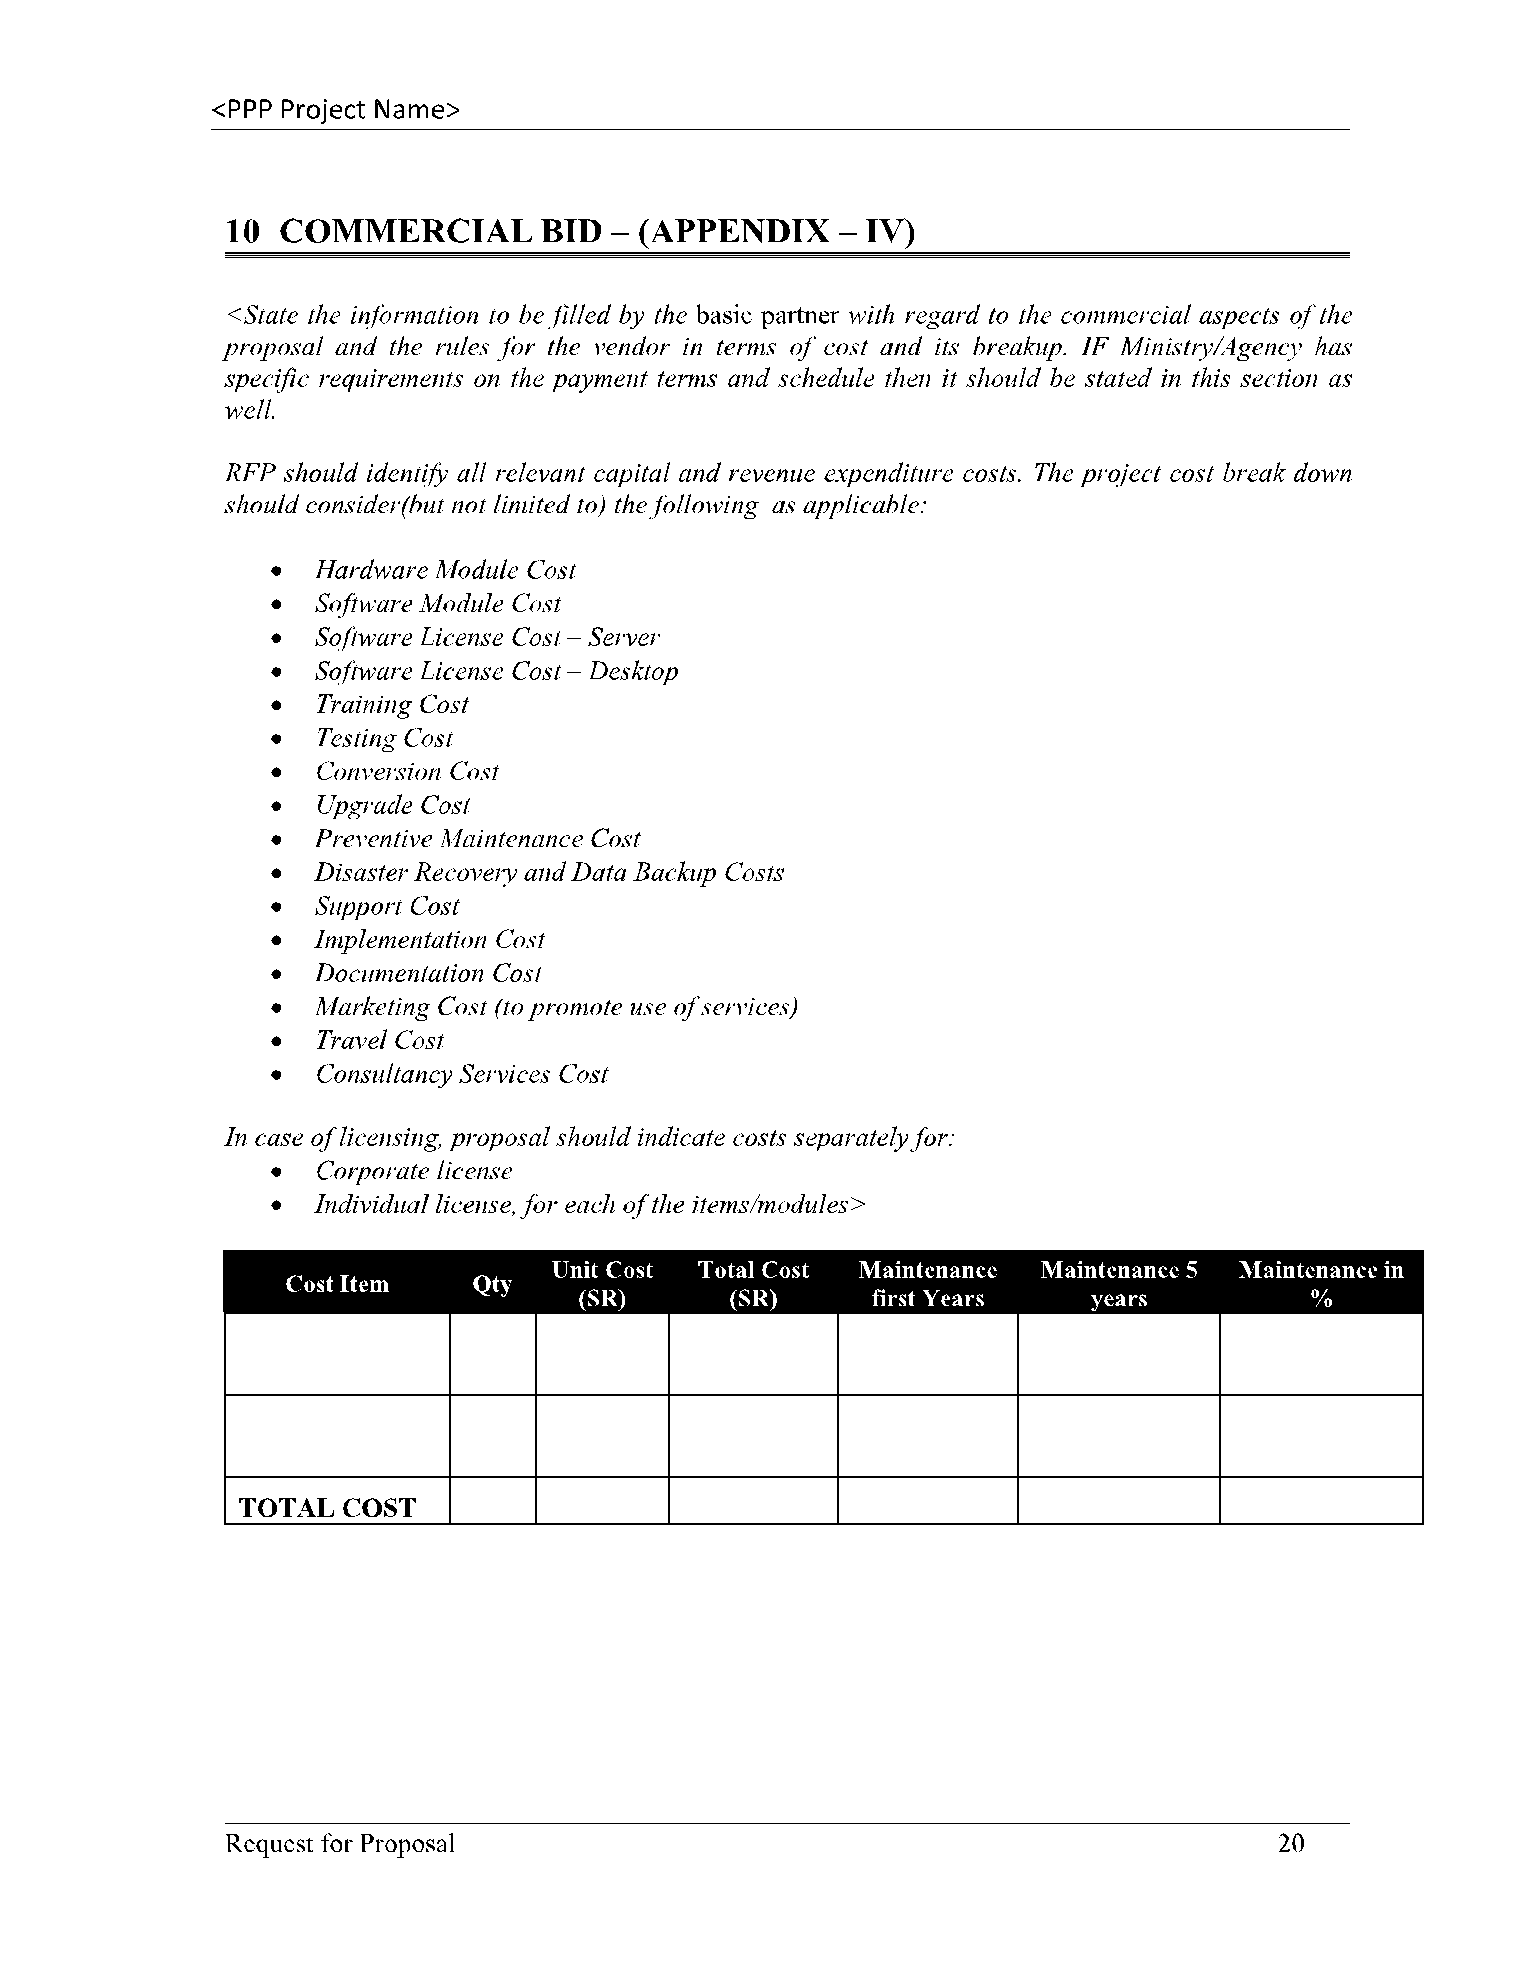 Request for Proposal Template 20